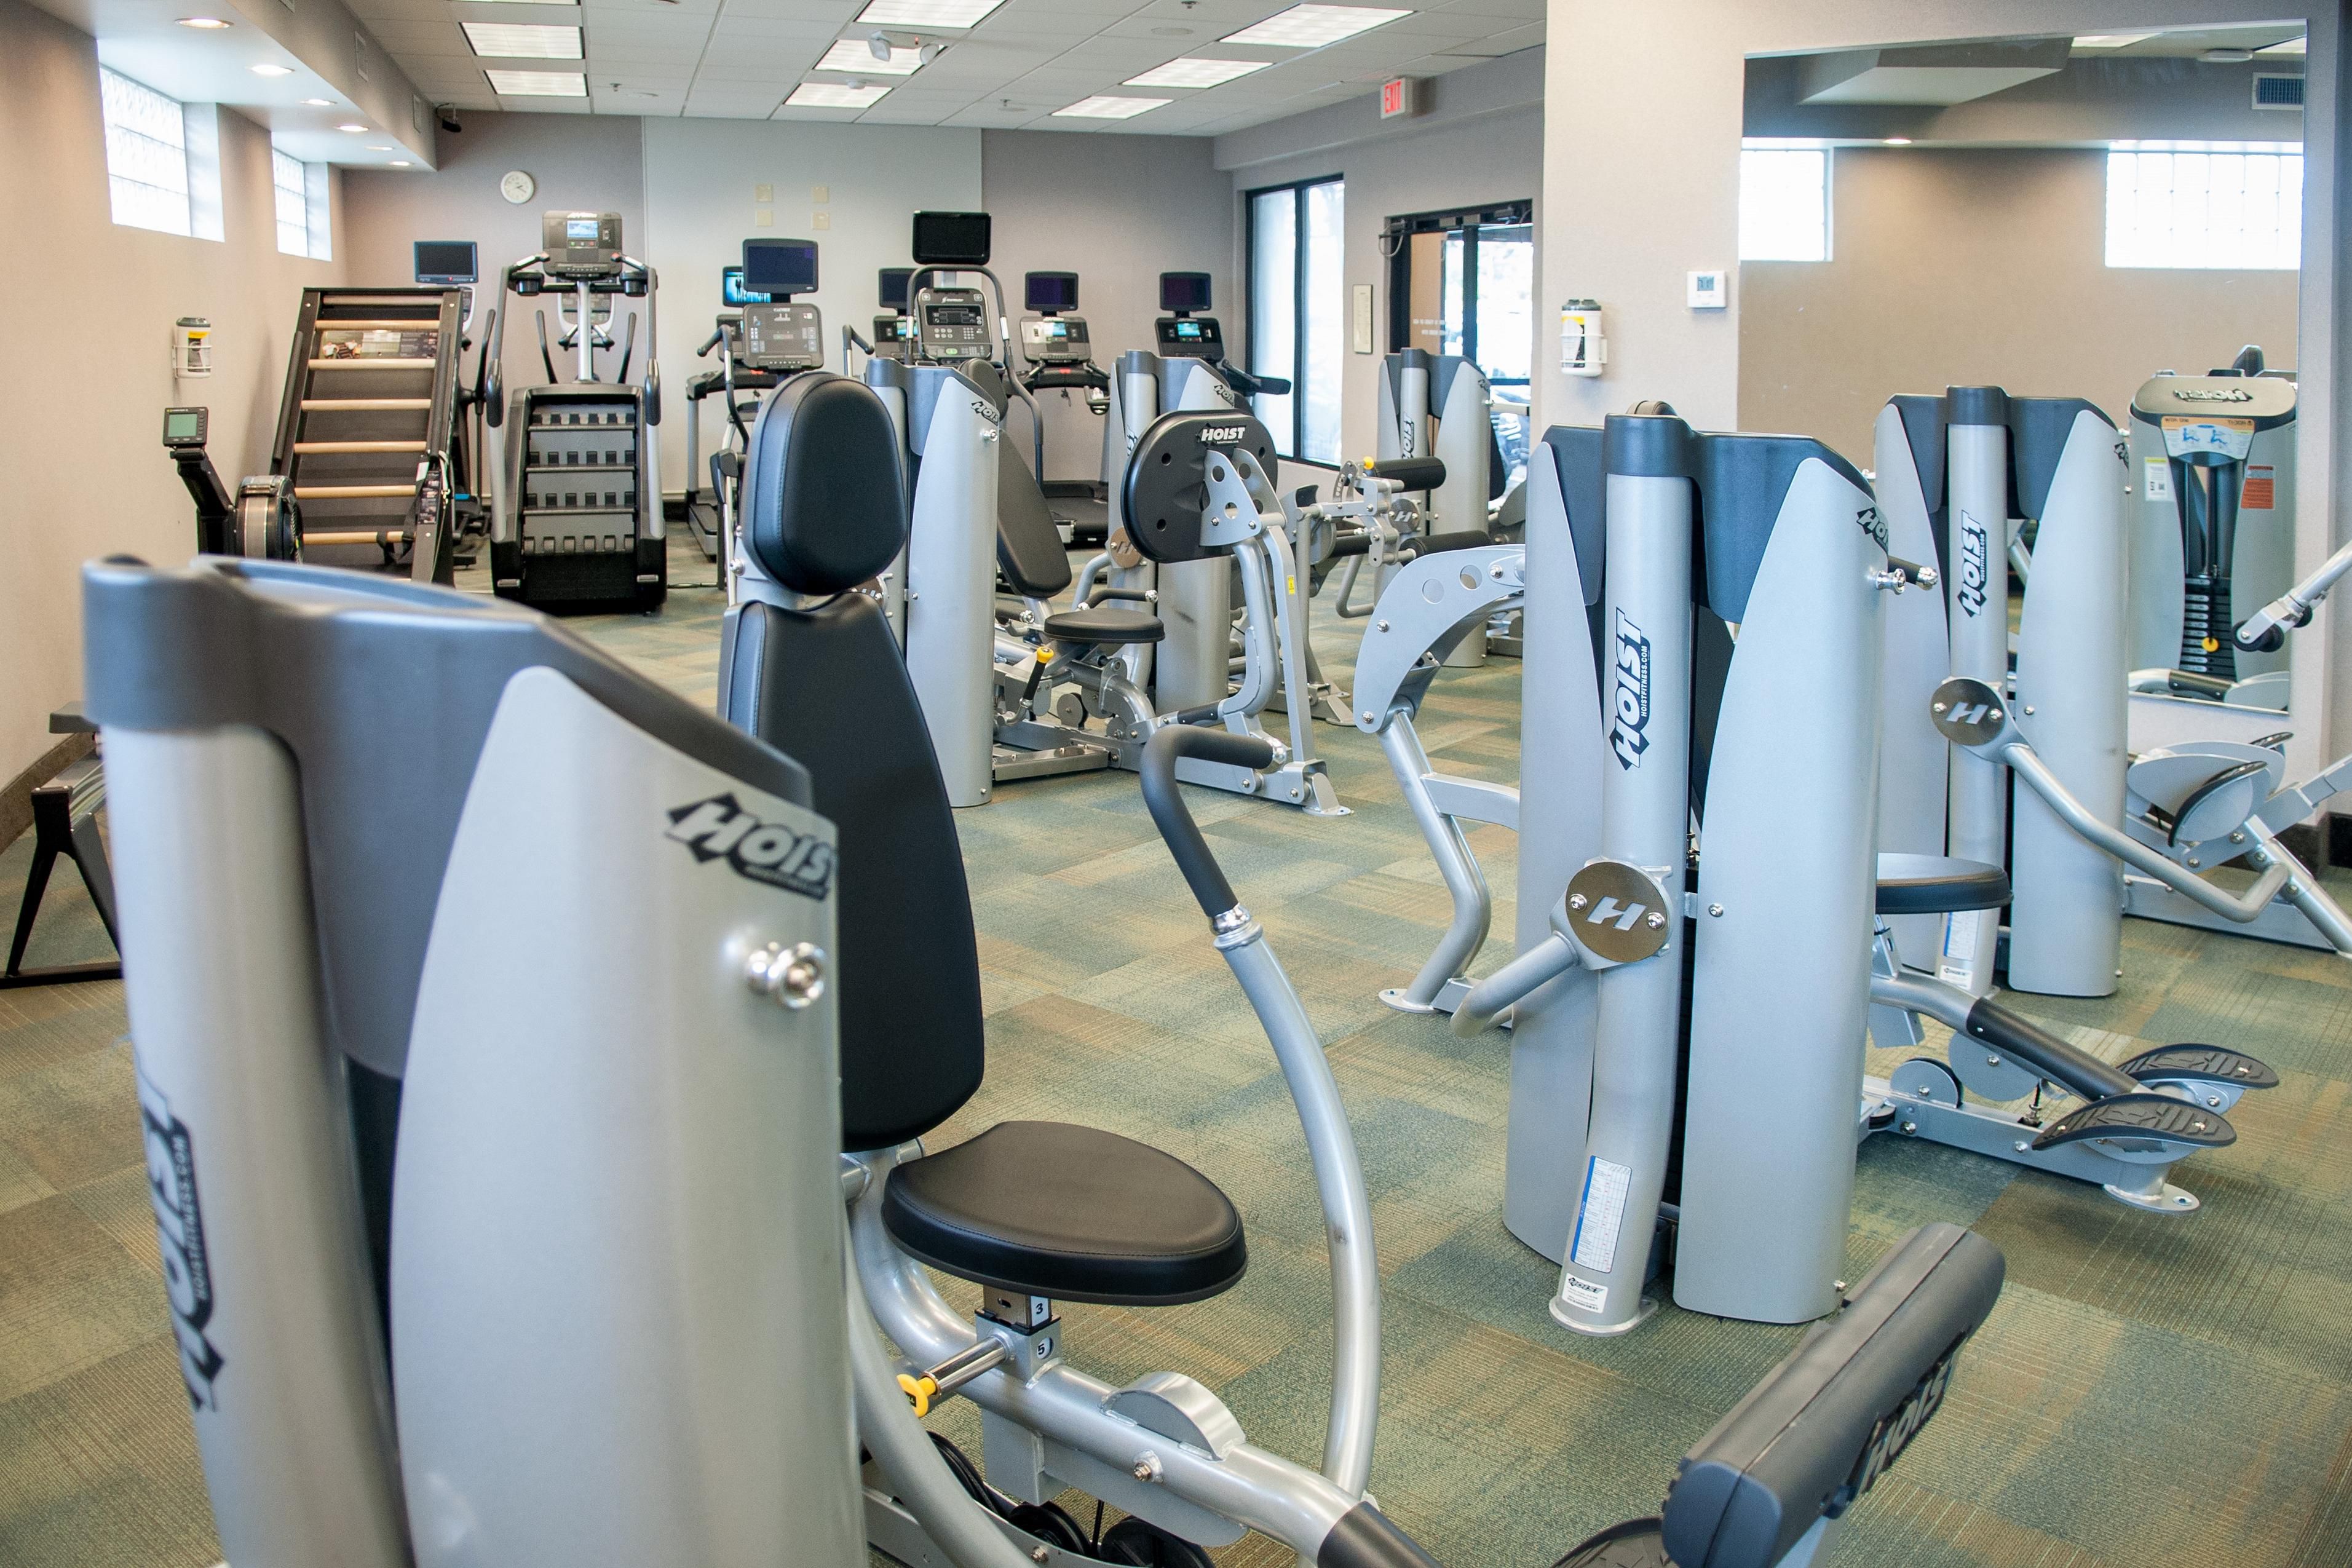 We provide fitness equipment for every type of workout.